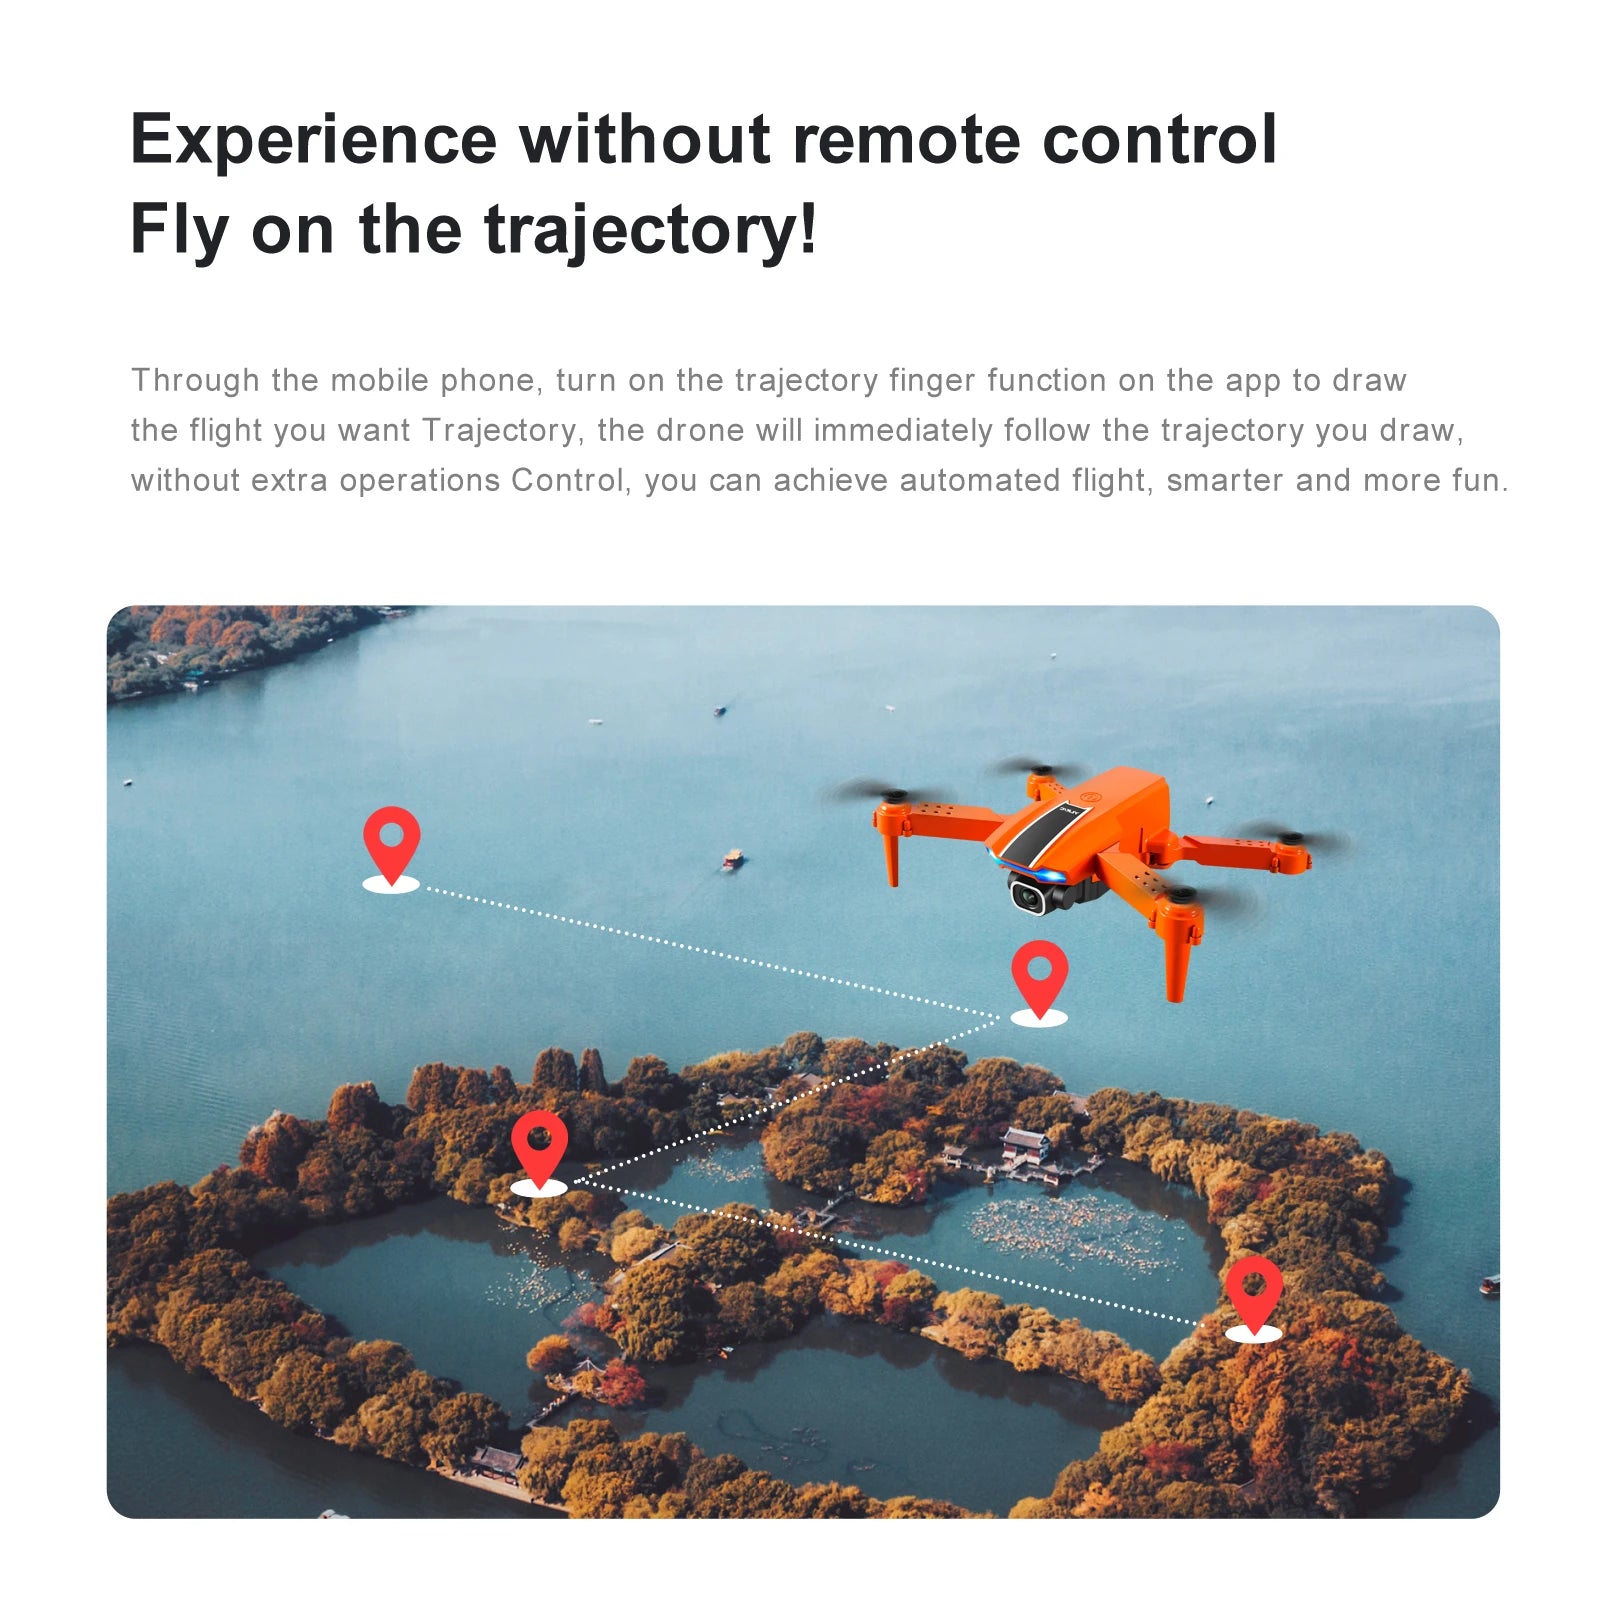 KBDFA S65 4K Mini Drone, the trajectory finger function on the trajectoryl app allows you to draw the